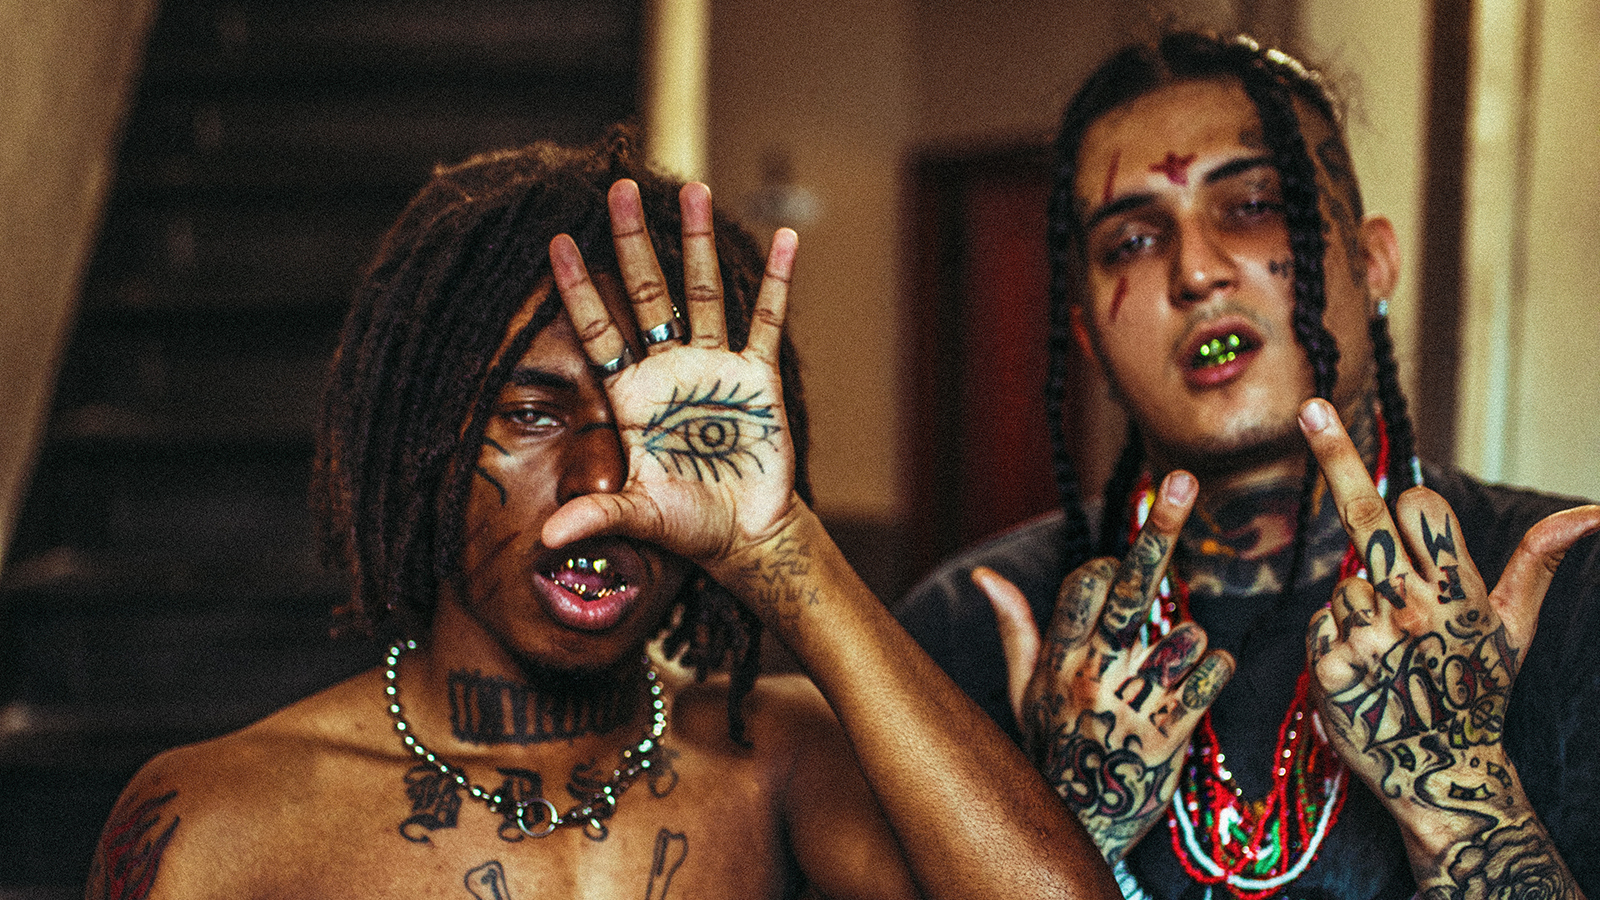 ZillaKami and SosMula hitting the road for a month later this year.